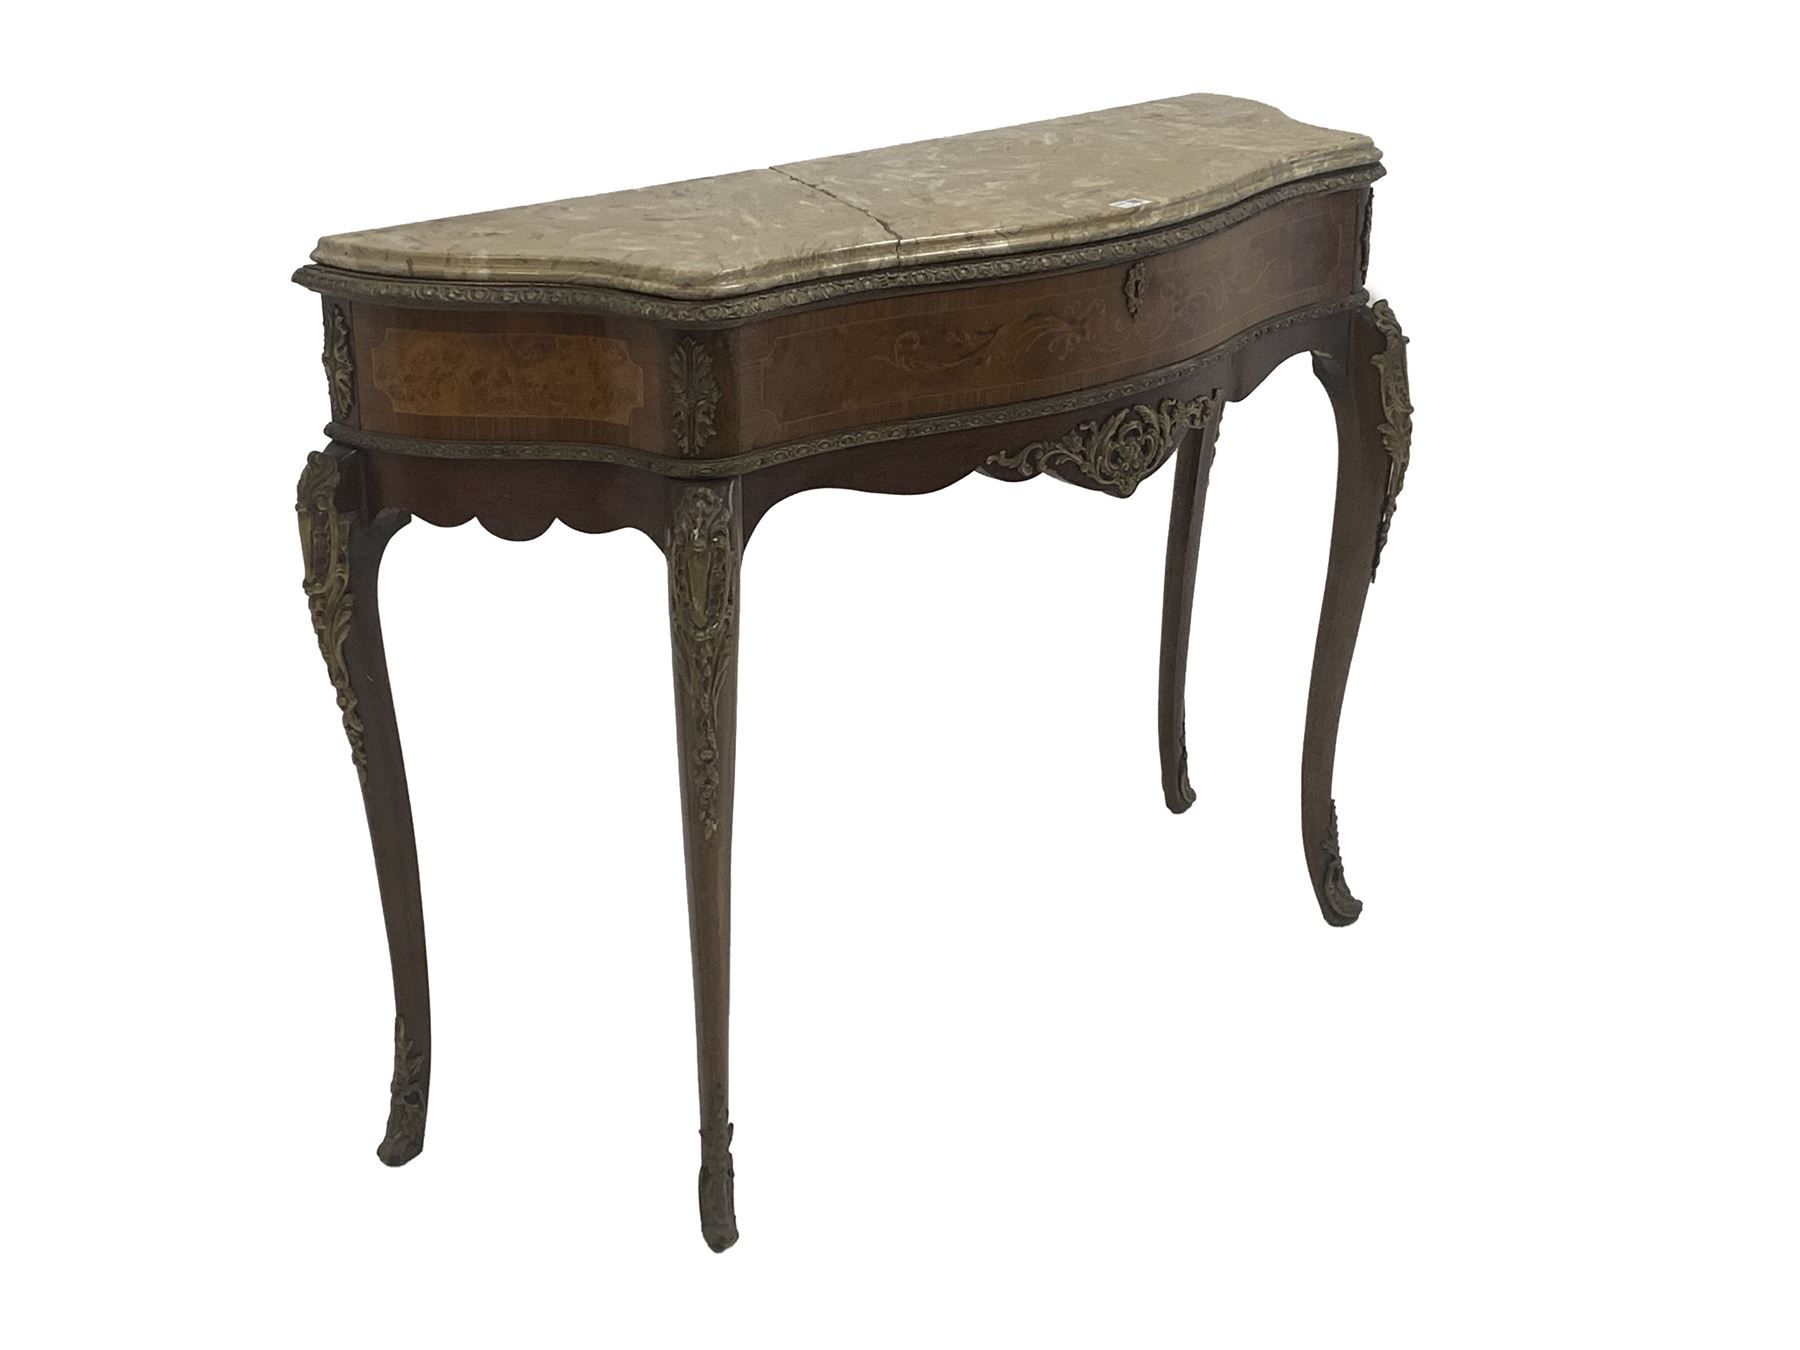 Mid 20th century French style walnut and mahogany veneered console table - Image 3 of 4